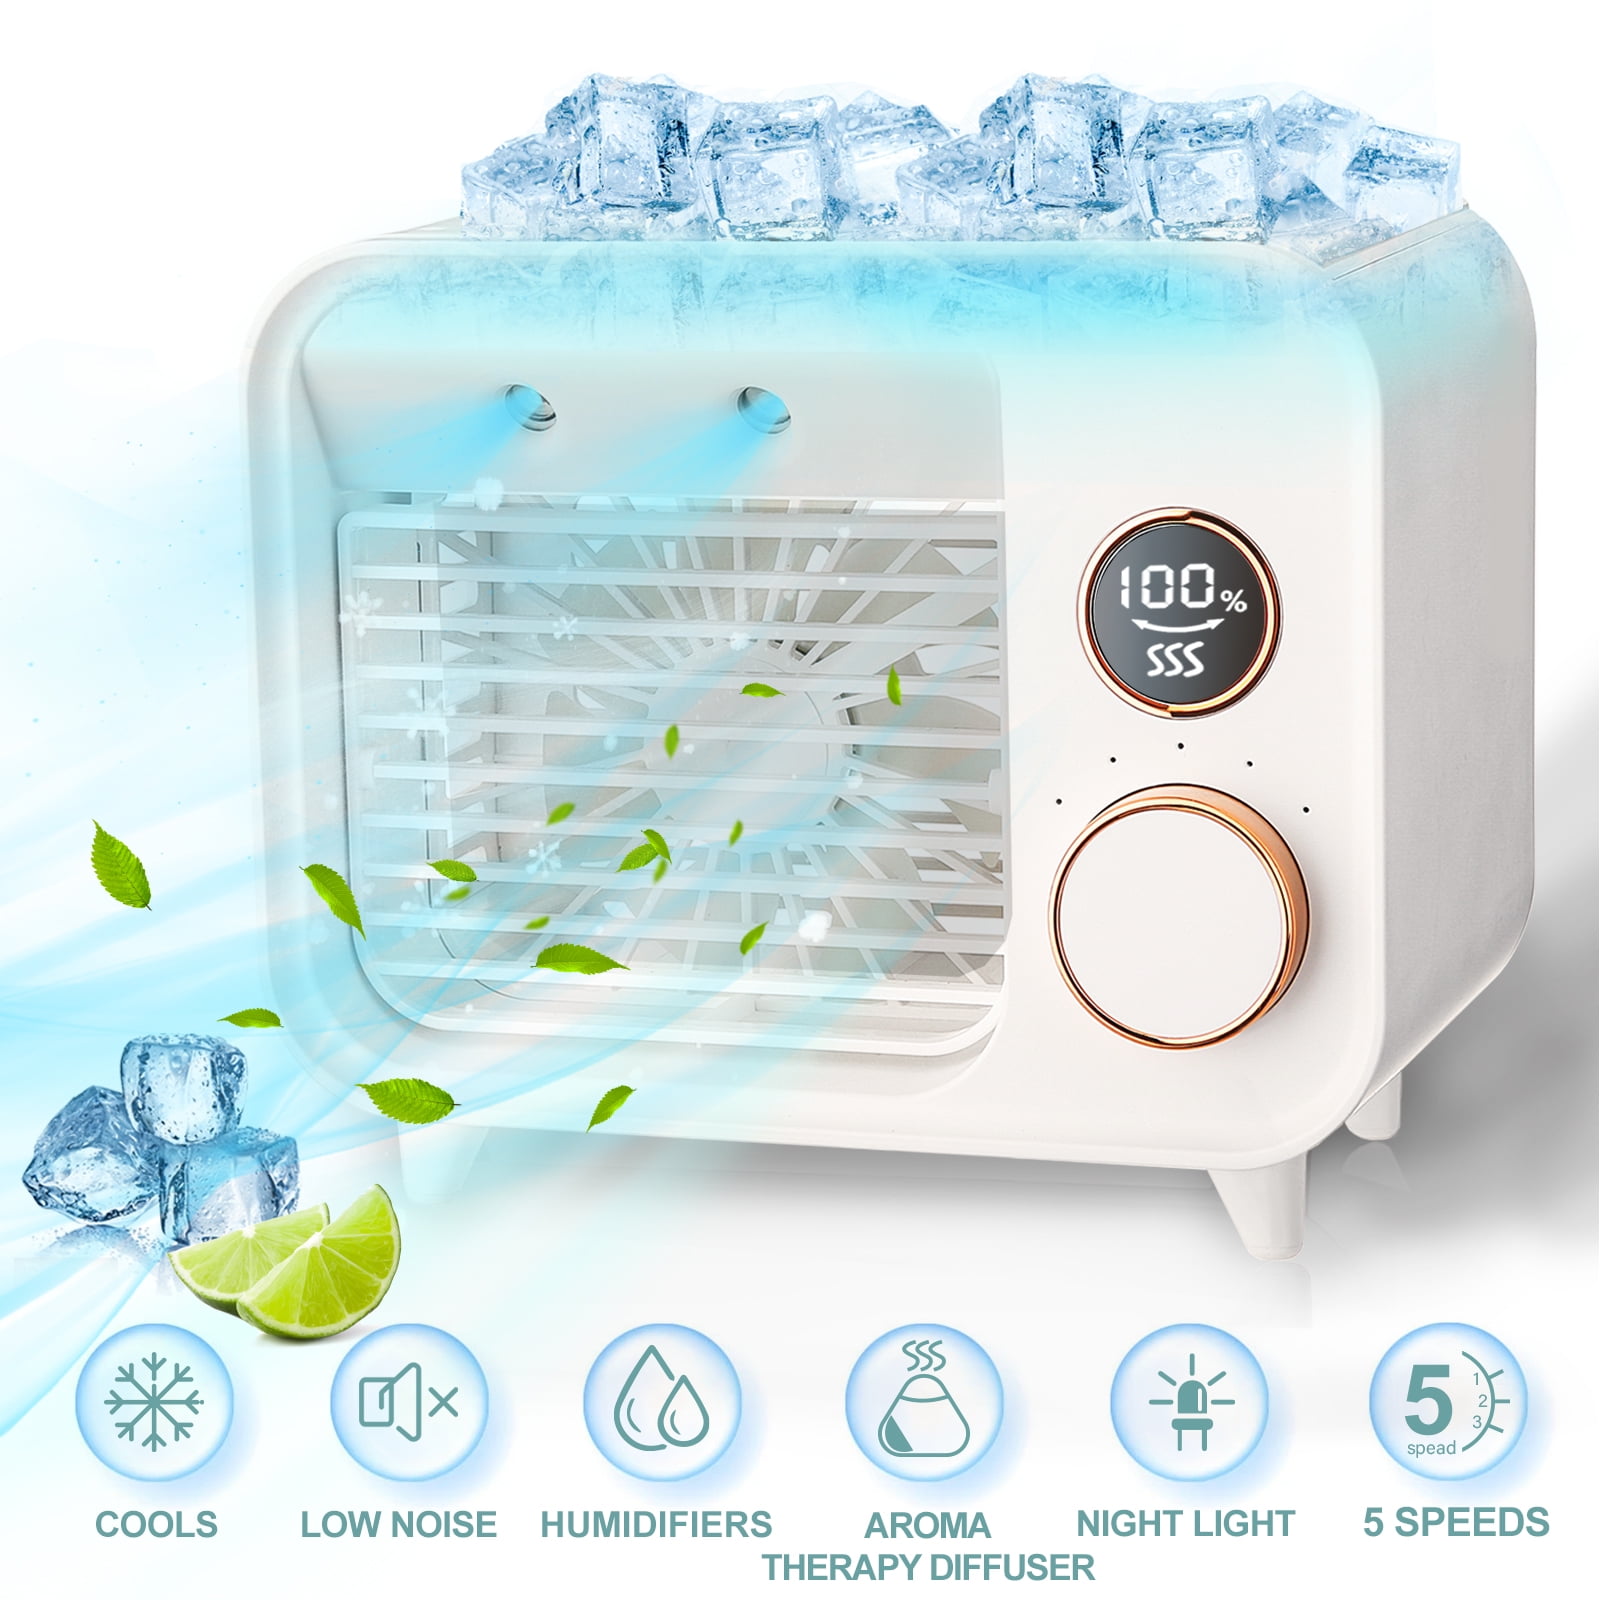 Personal Portable Cooler AC Air Conditioner unit Air Fan Humidifier US 